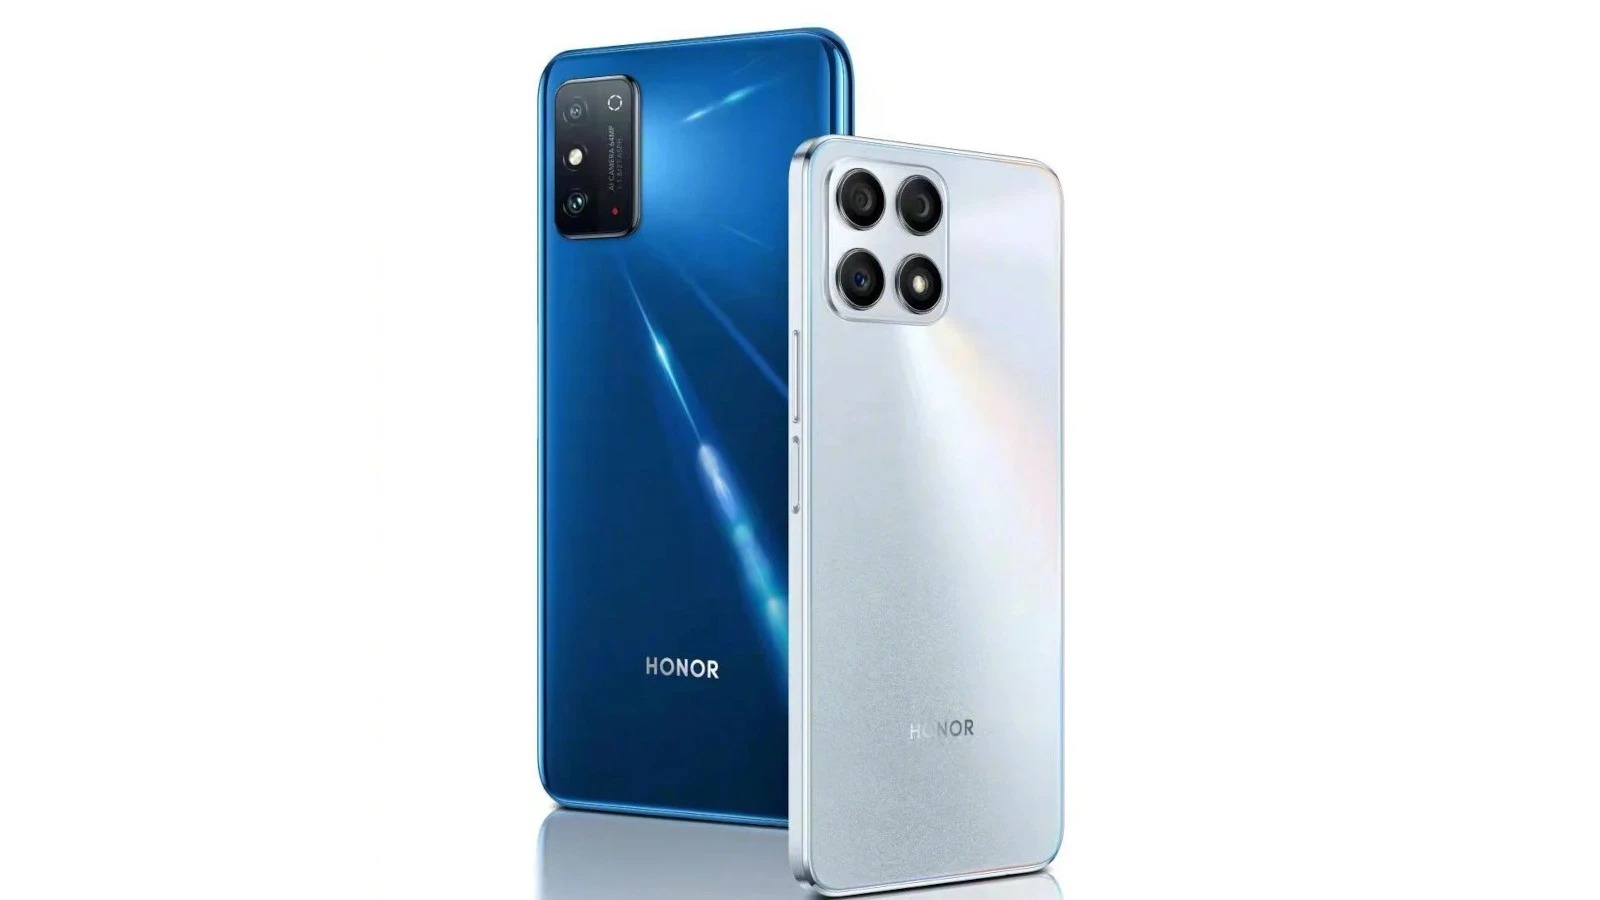 The Honor X30 will be announced